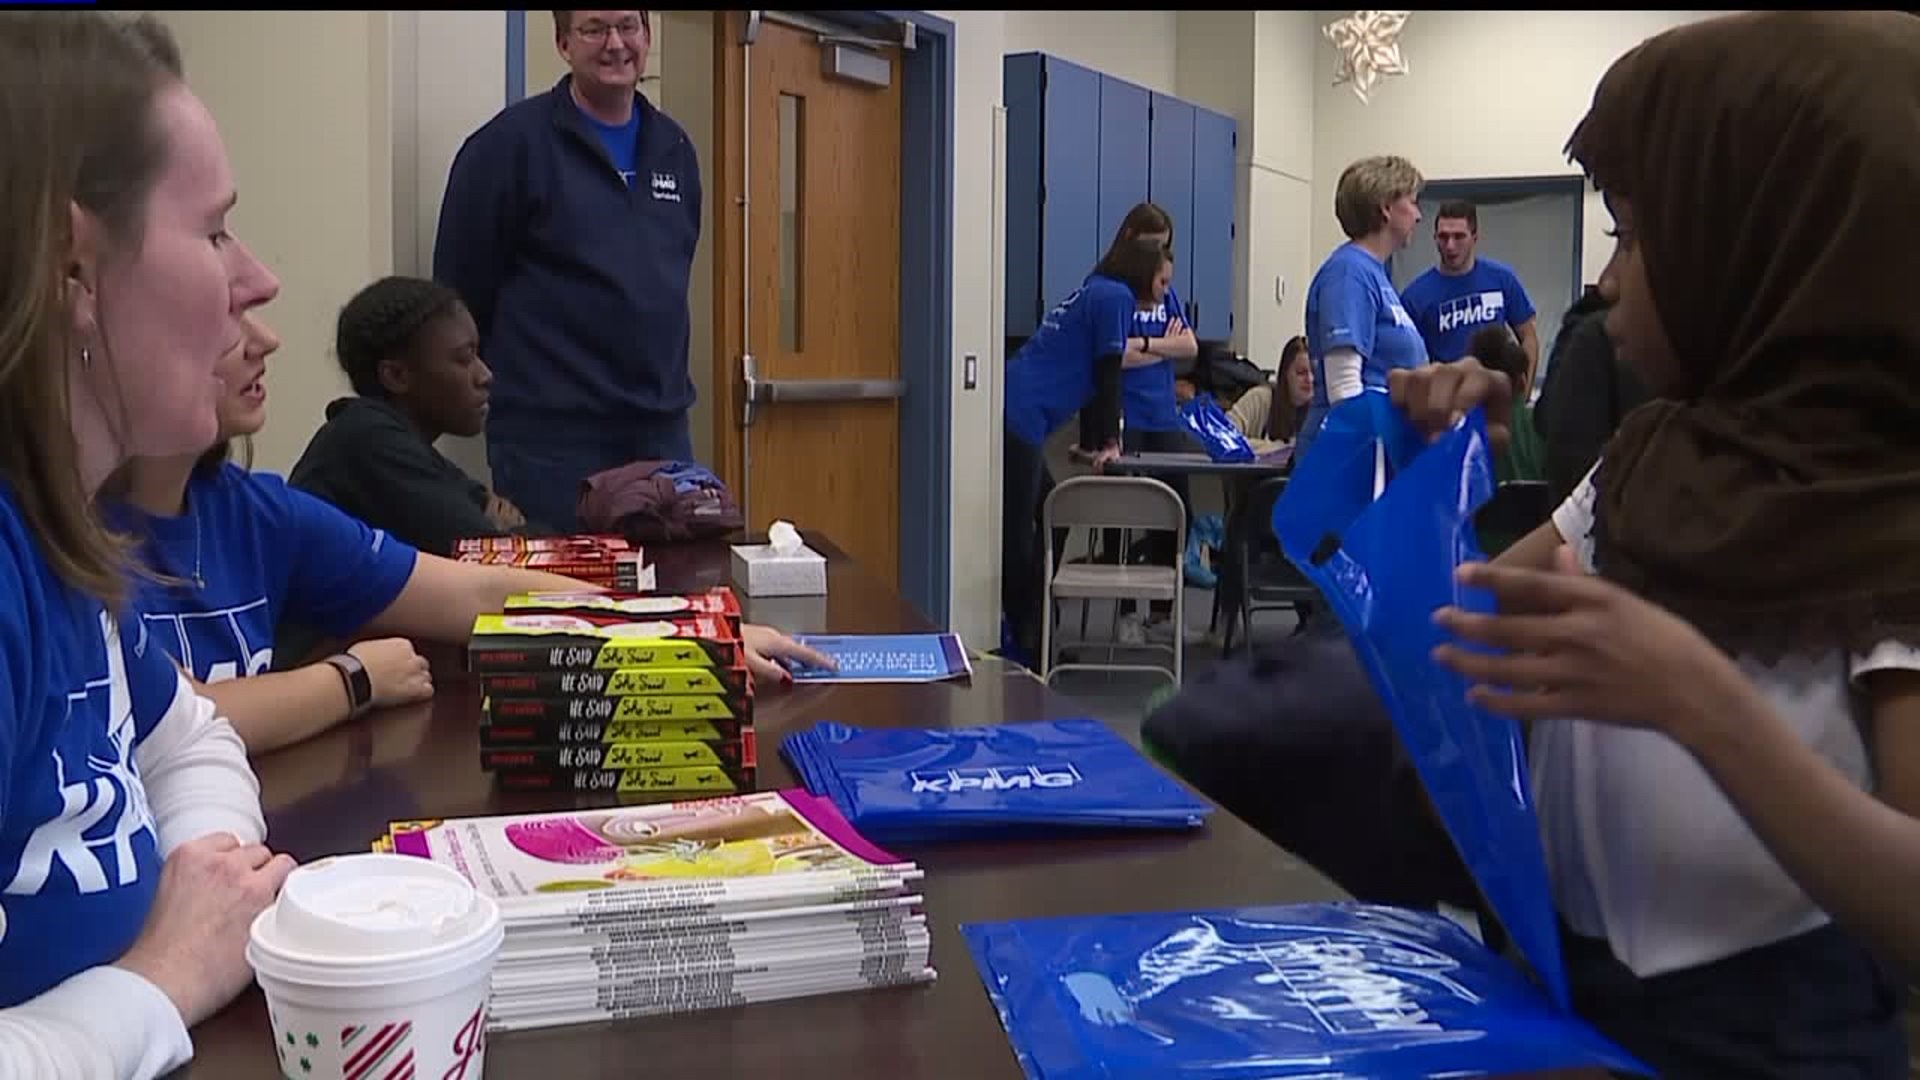 Students receive books at Literacy Extravanganza